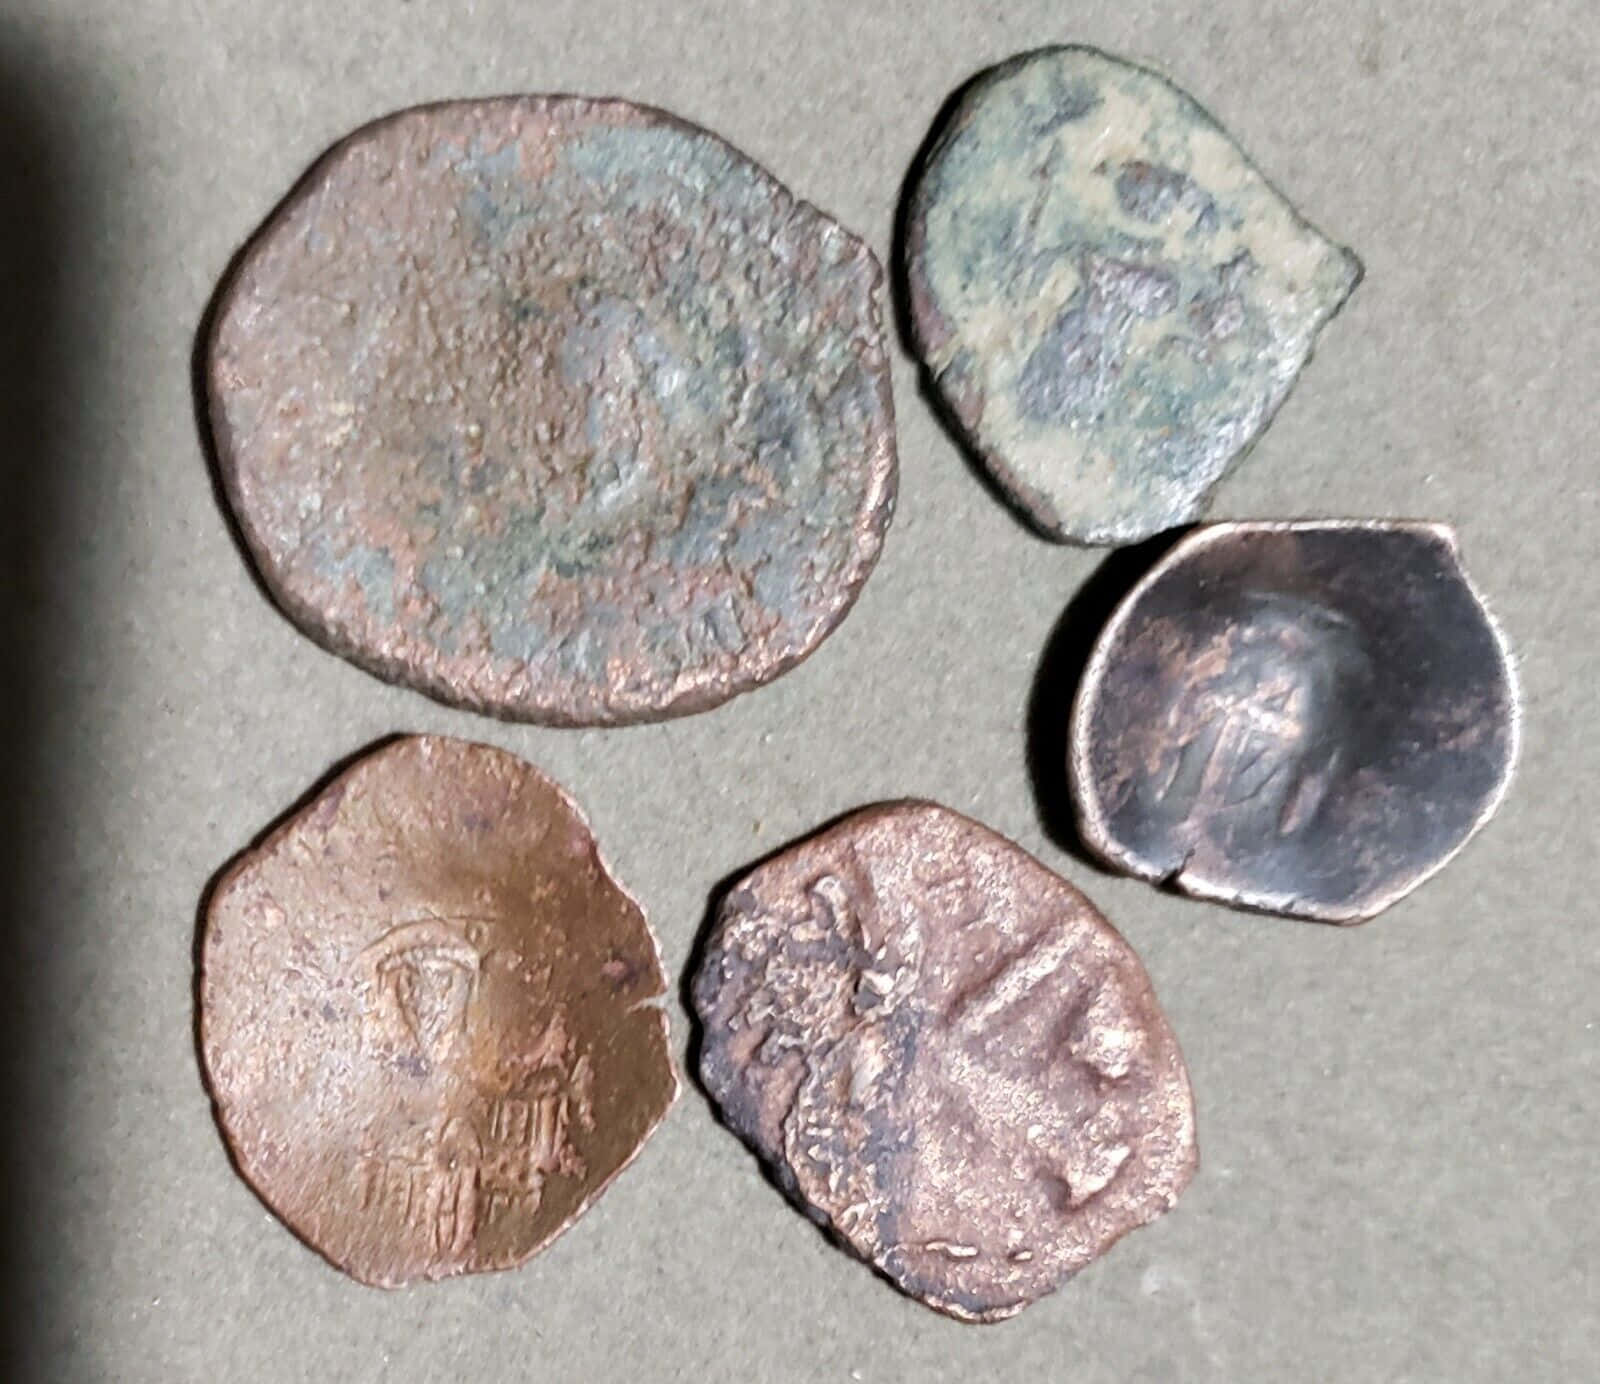 A Group Of Coins With A Satyr On Them